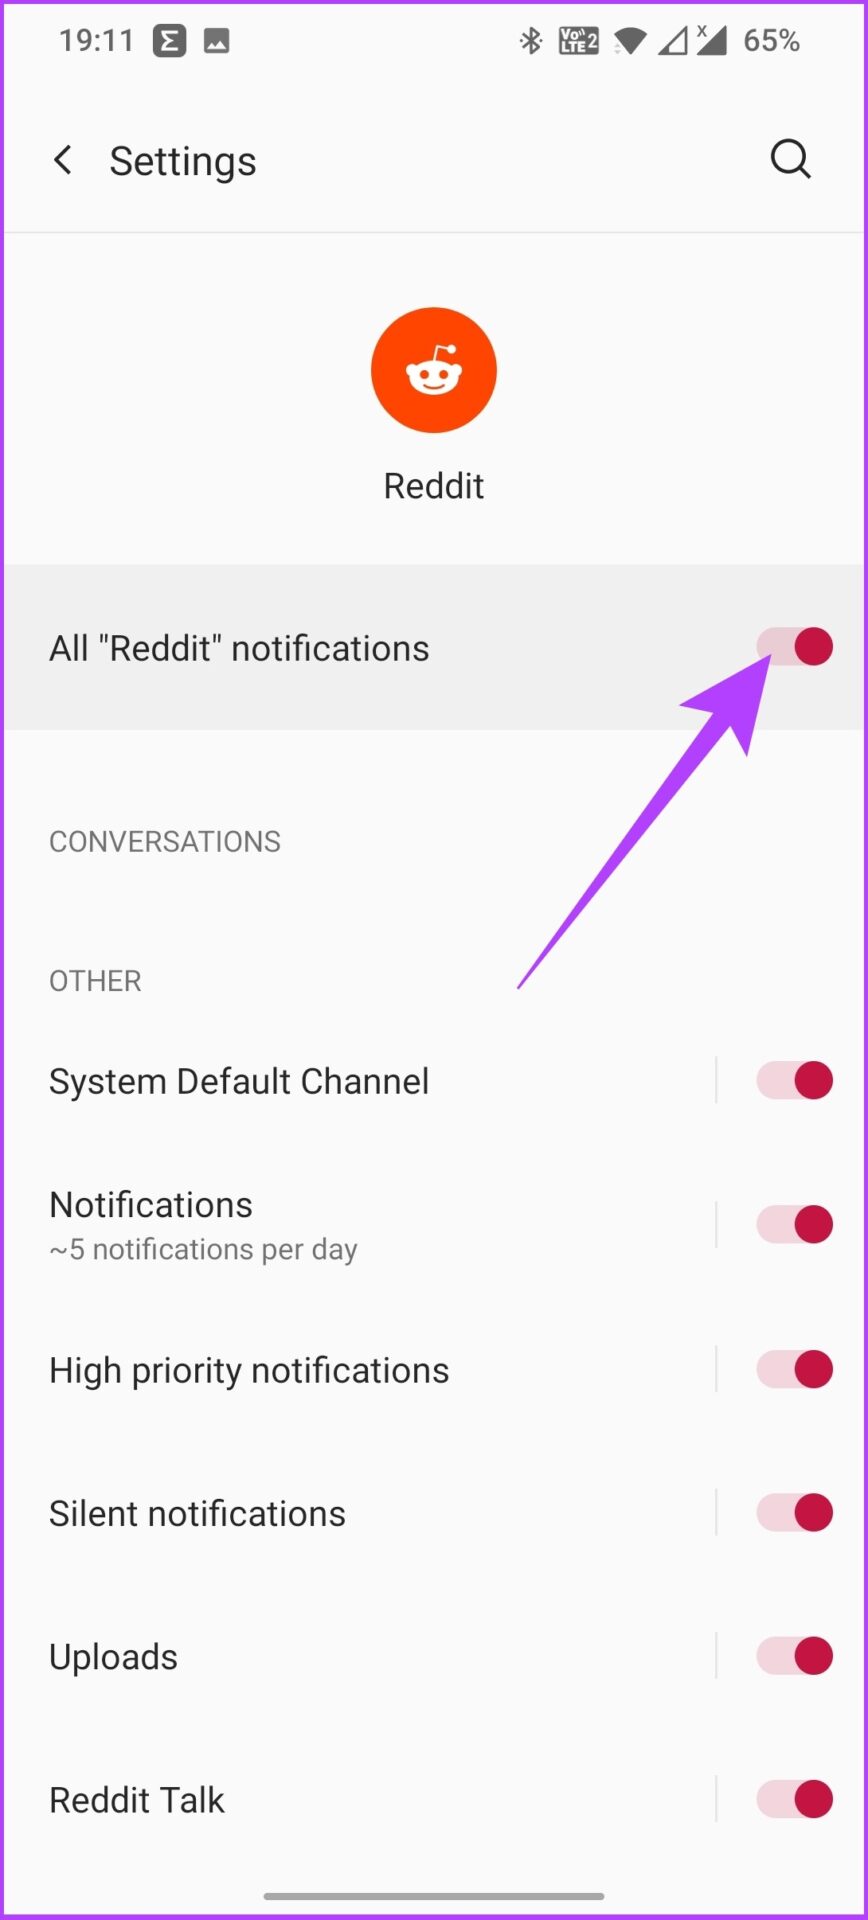 Toggle off all notifications